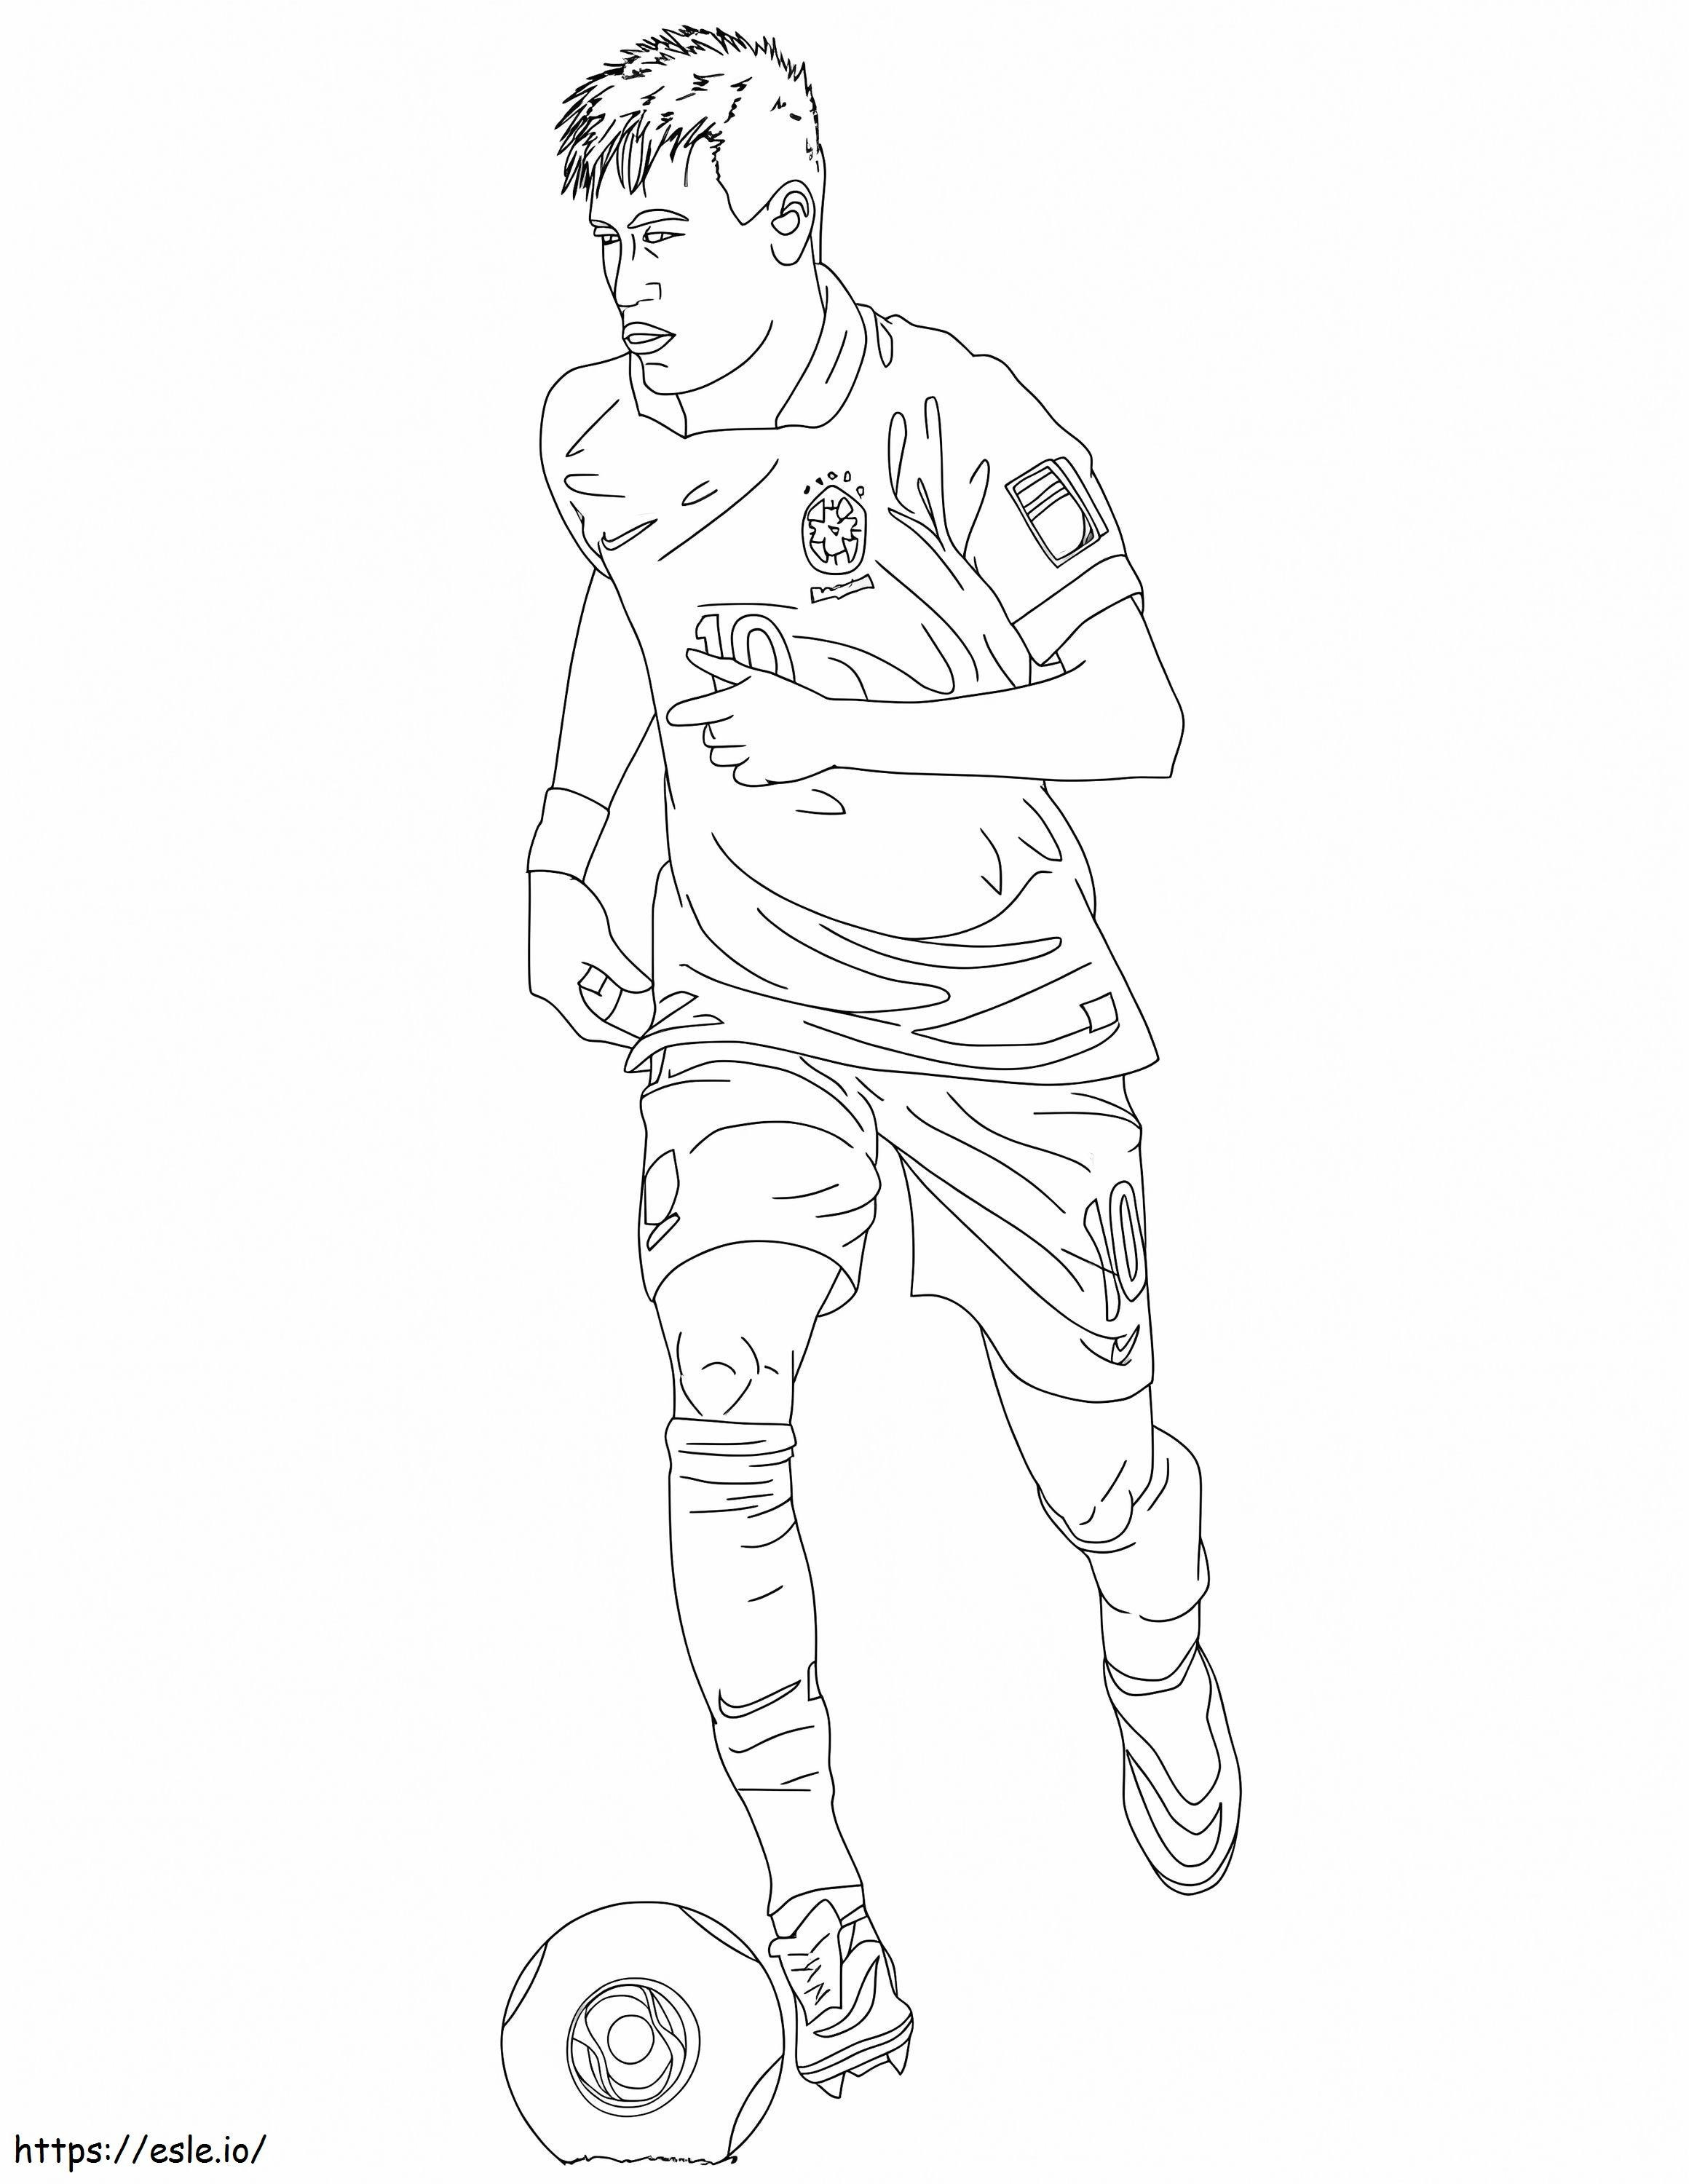 Neymar 7 coloring page